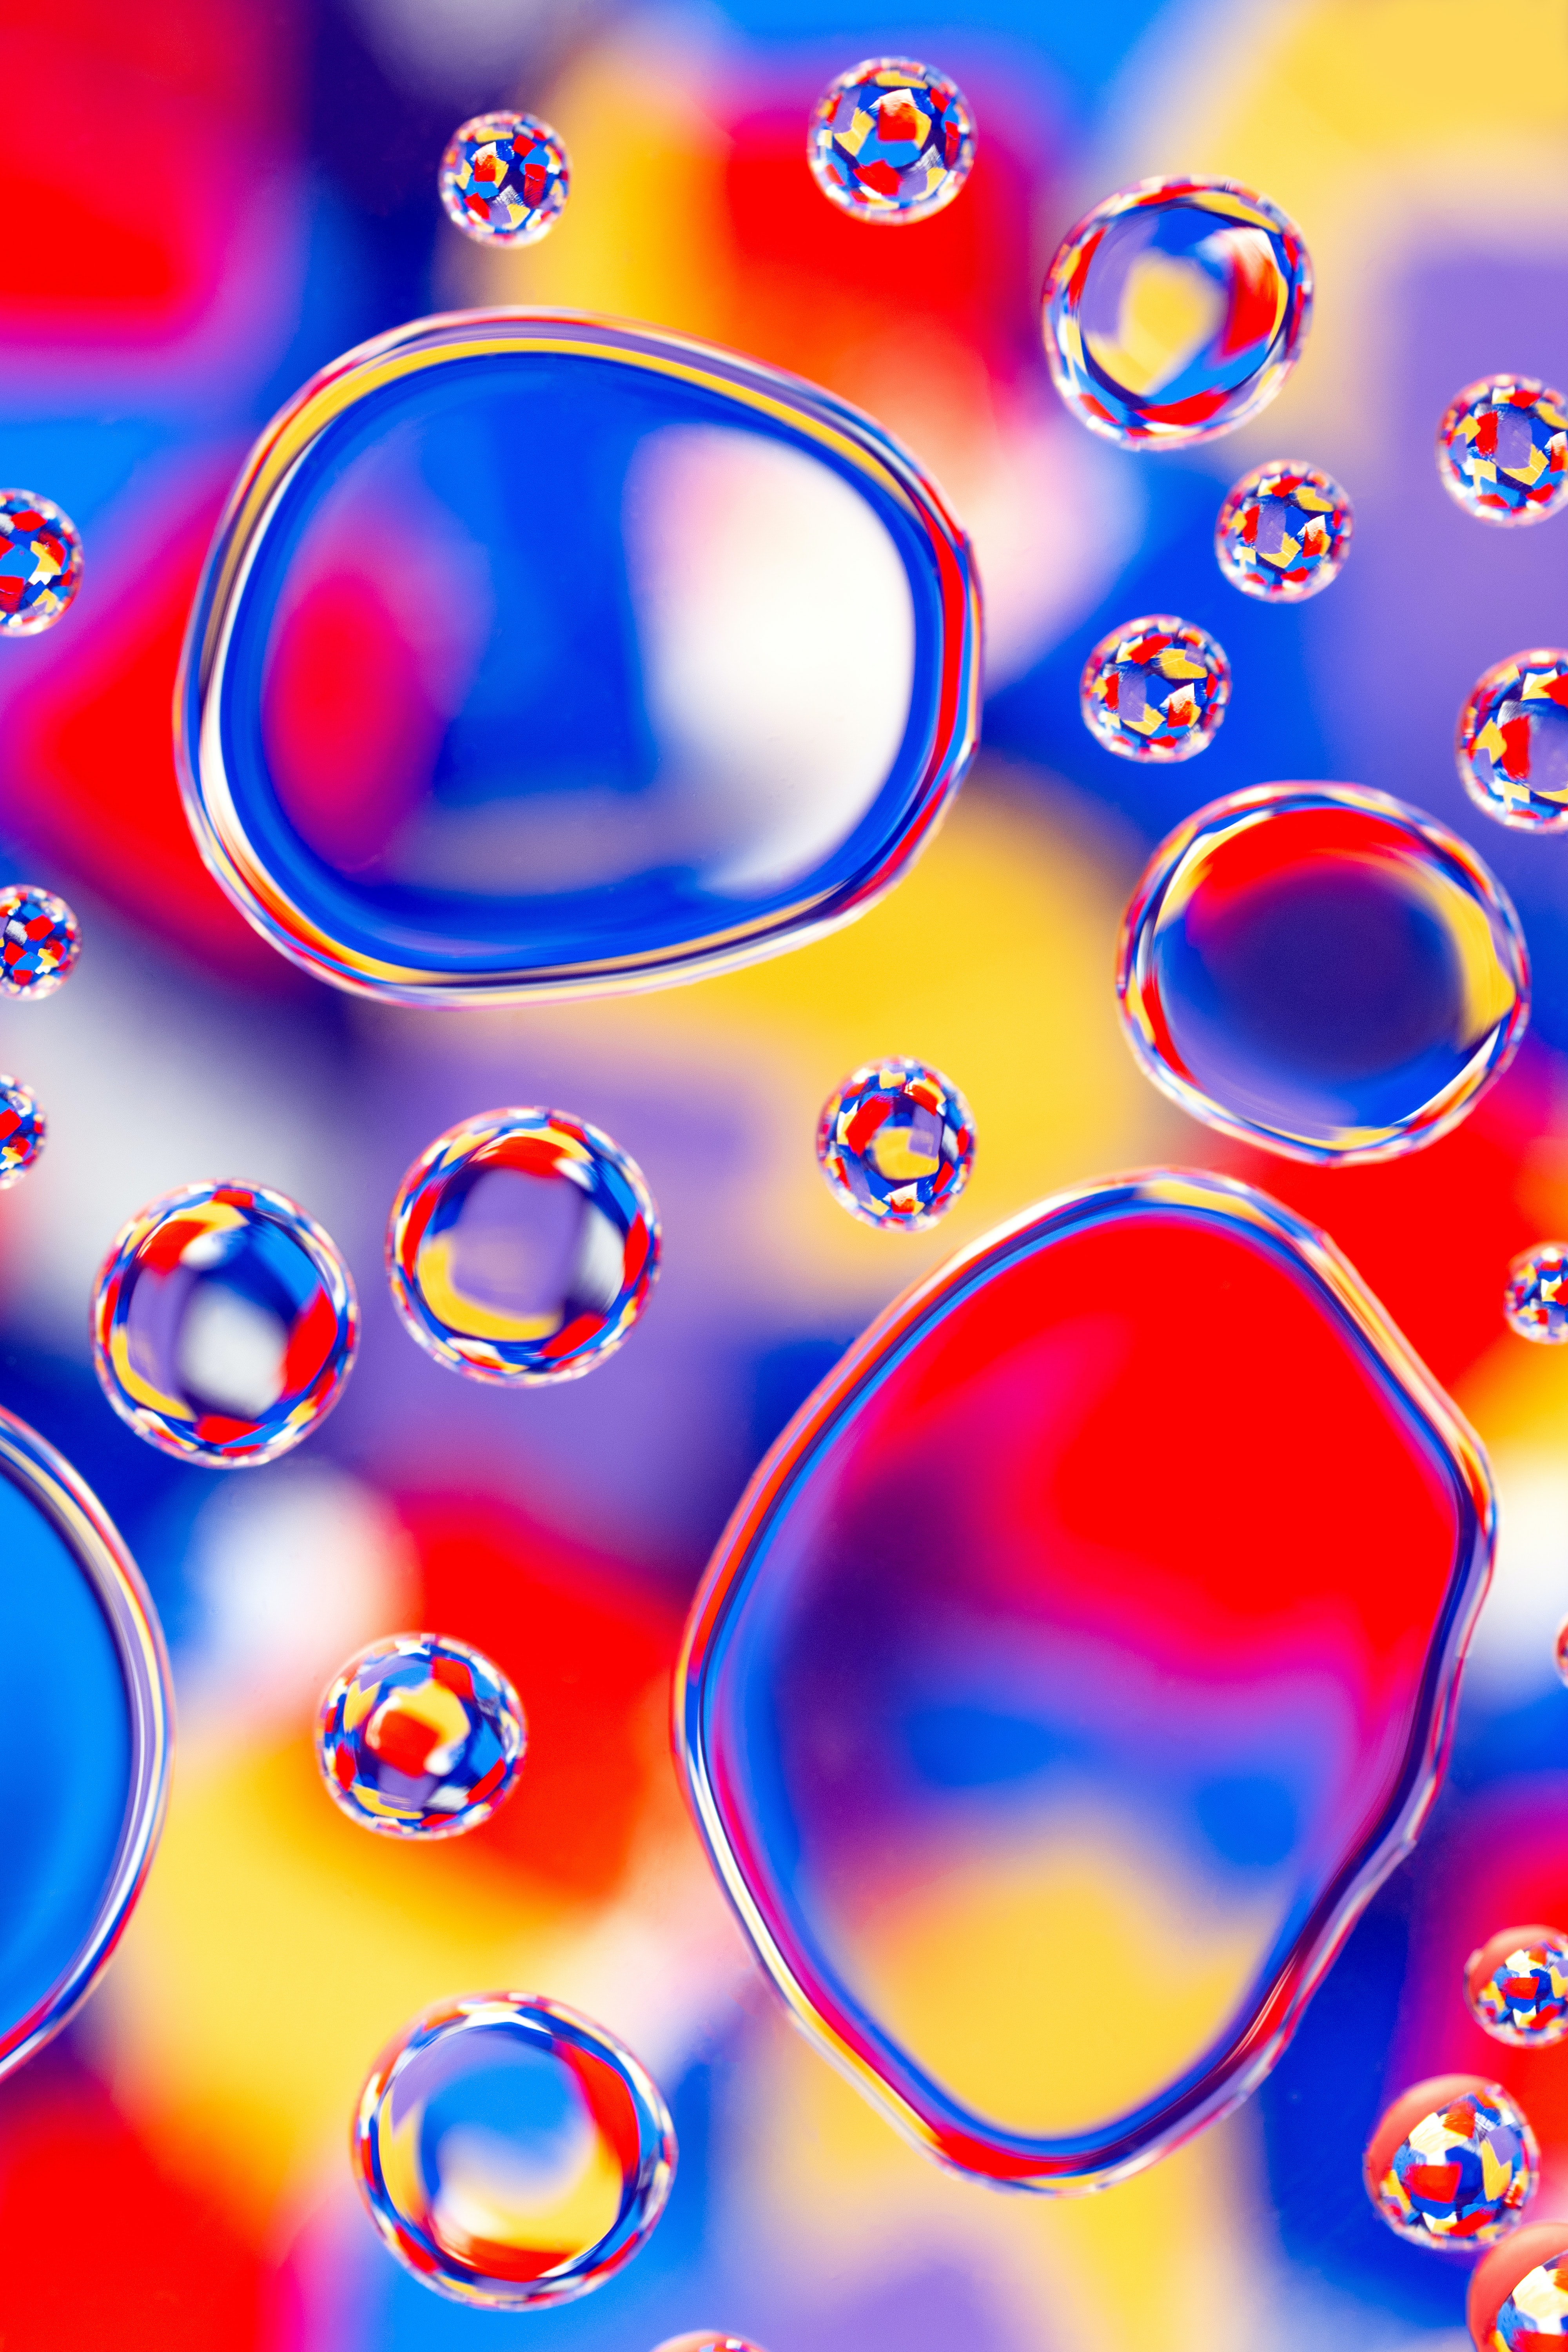 Free Images motley, smooth, water, multicolored Bubbles